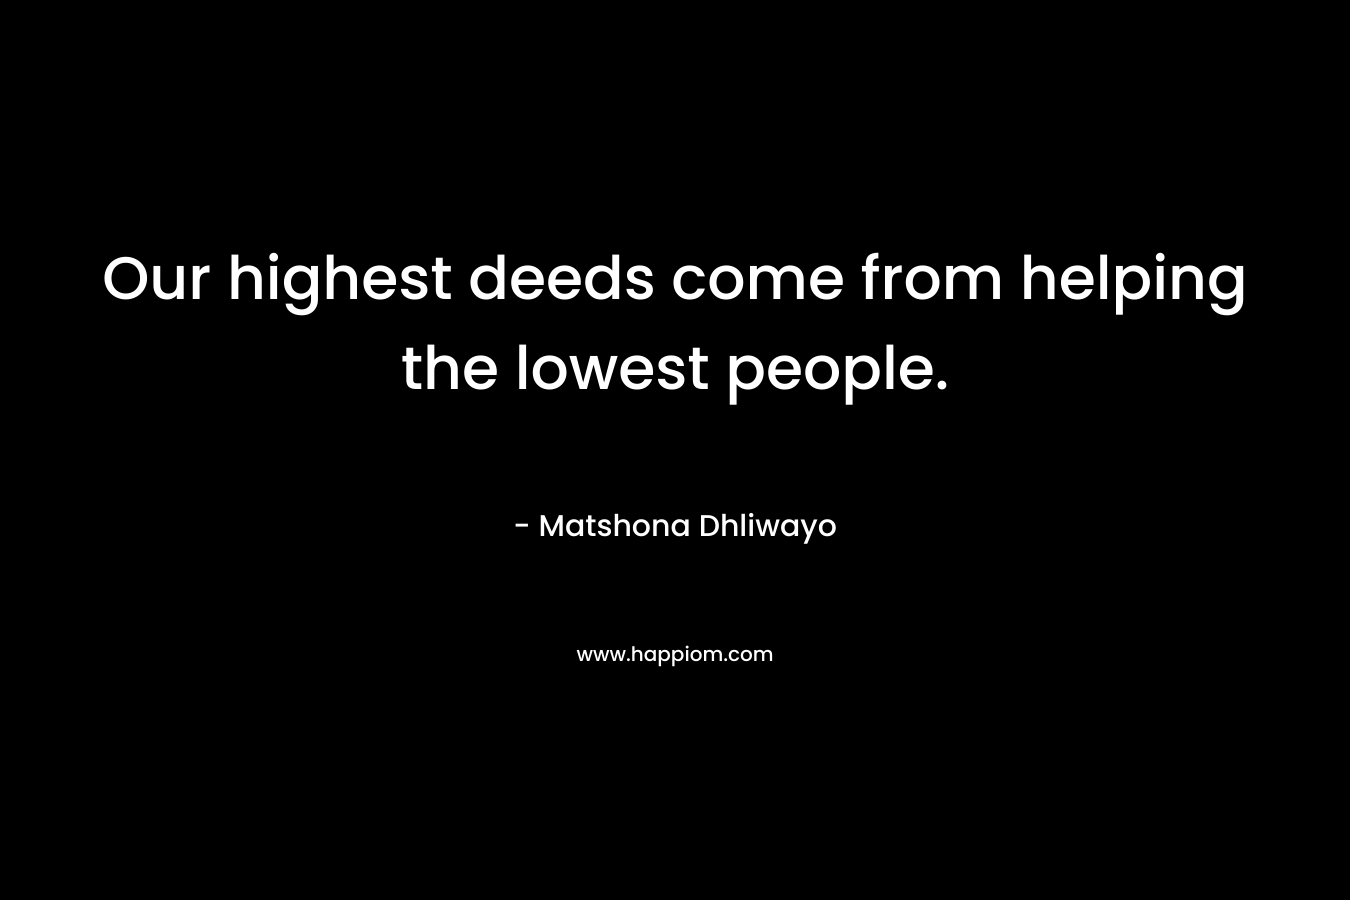 Our highest deeds come from helping the lowest people. – Matshona Dhliwayo